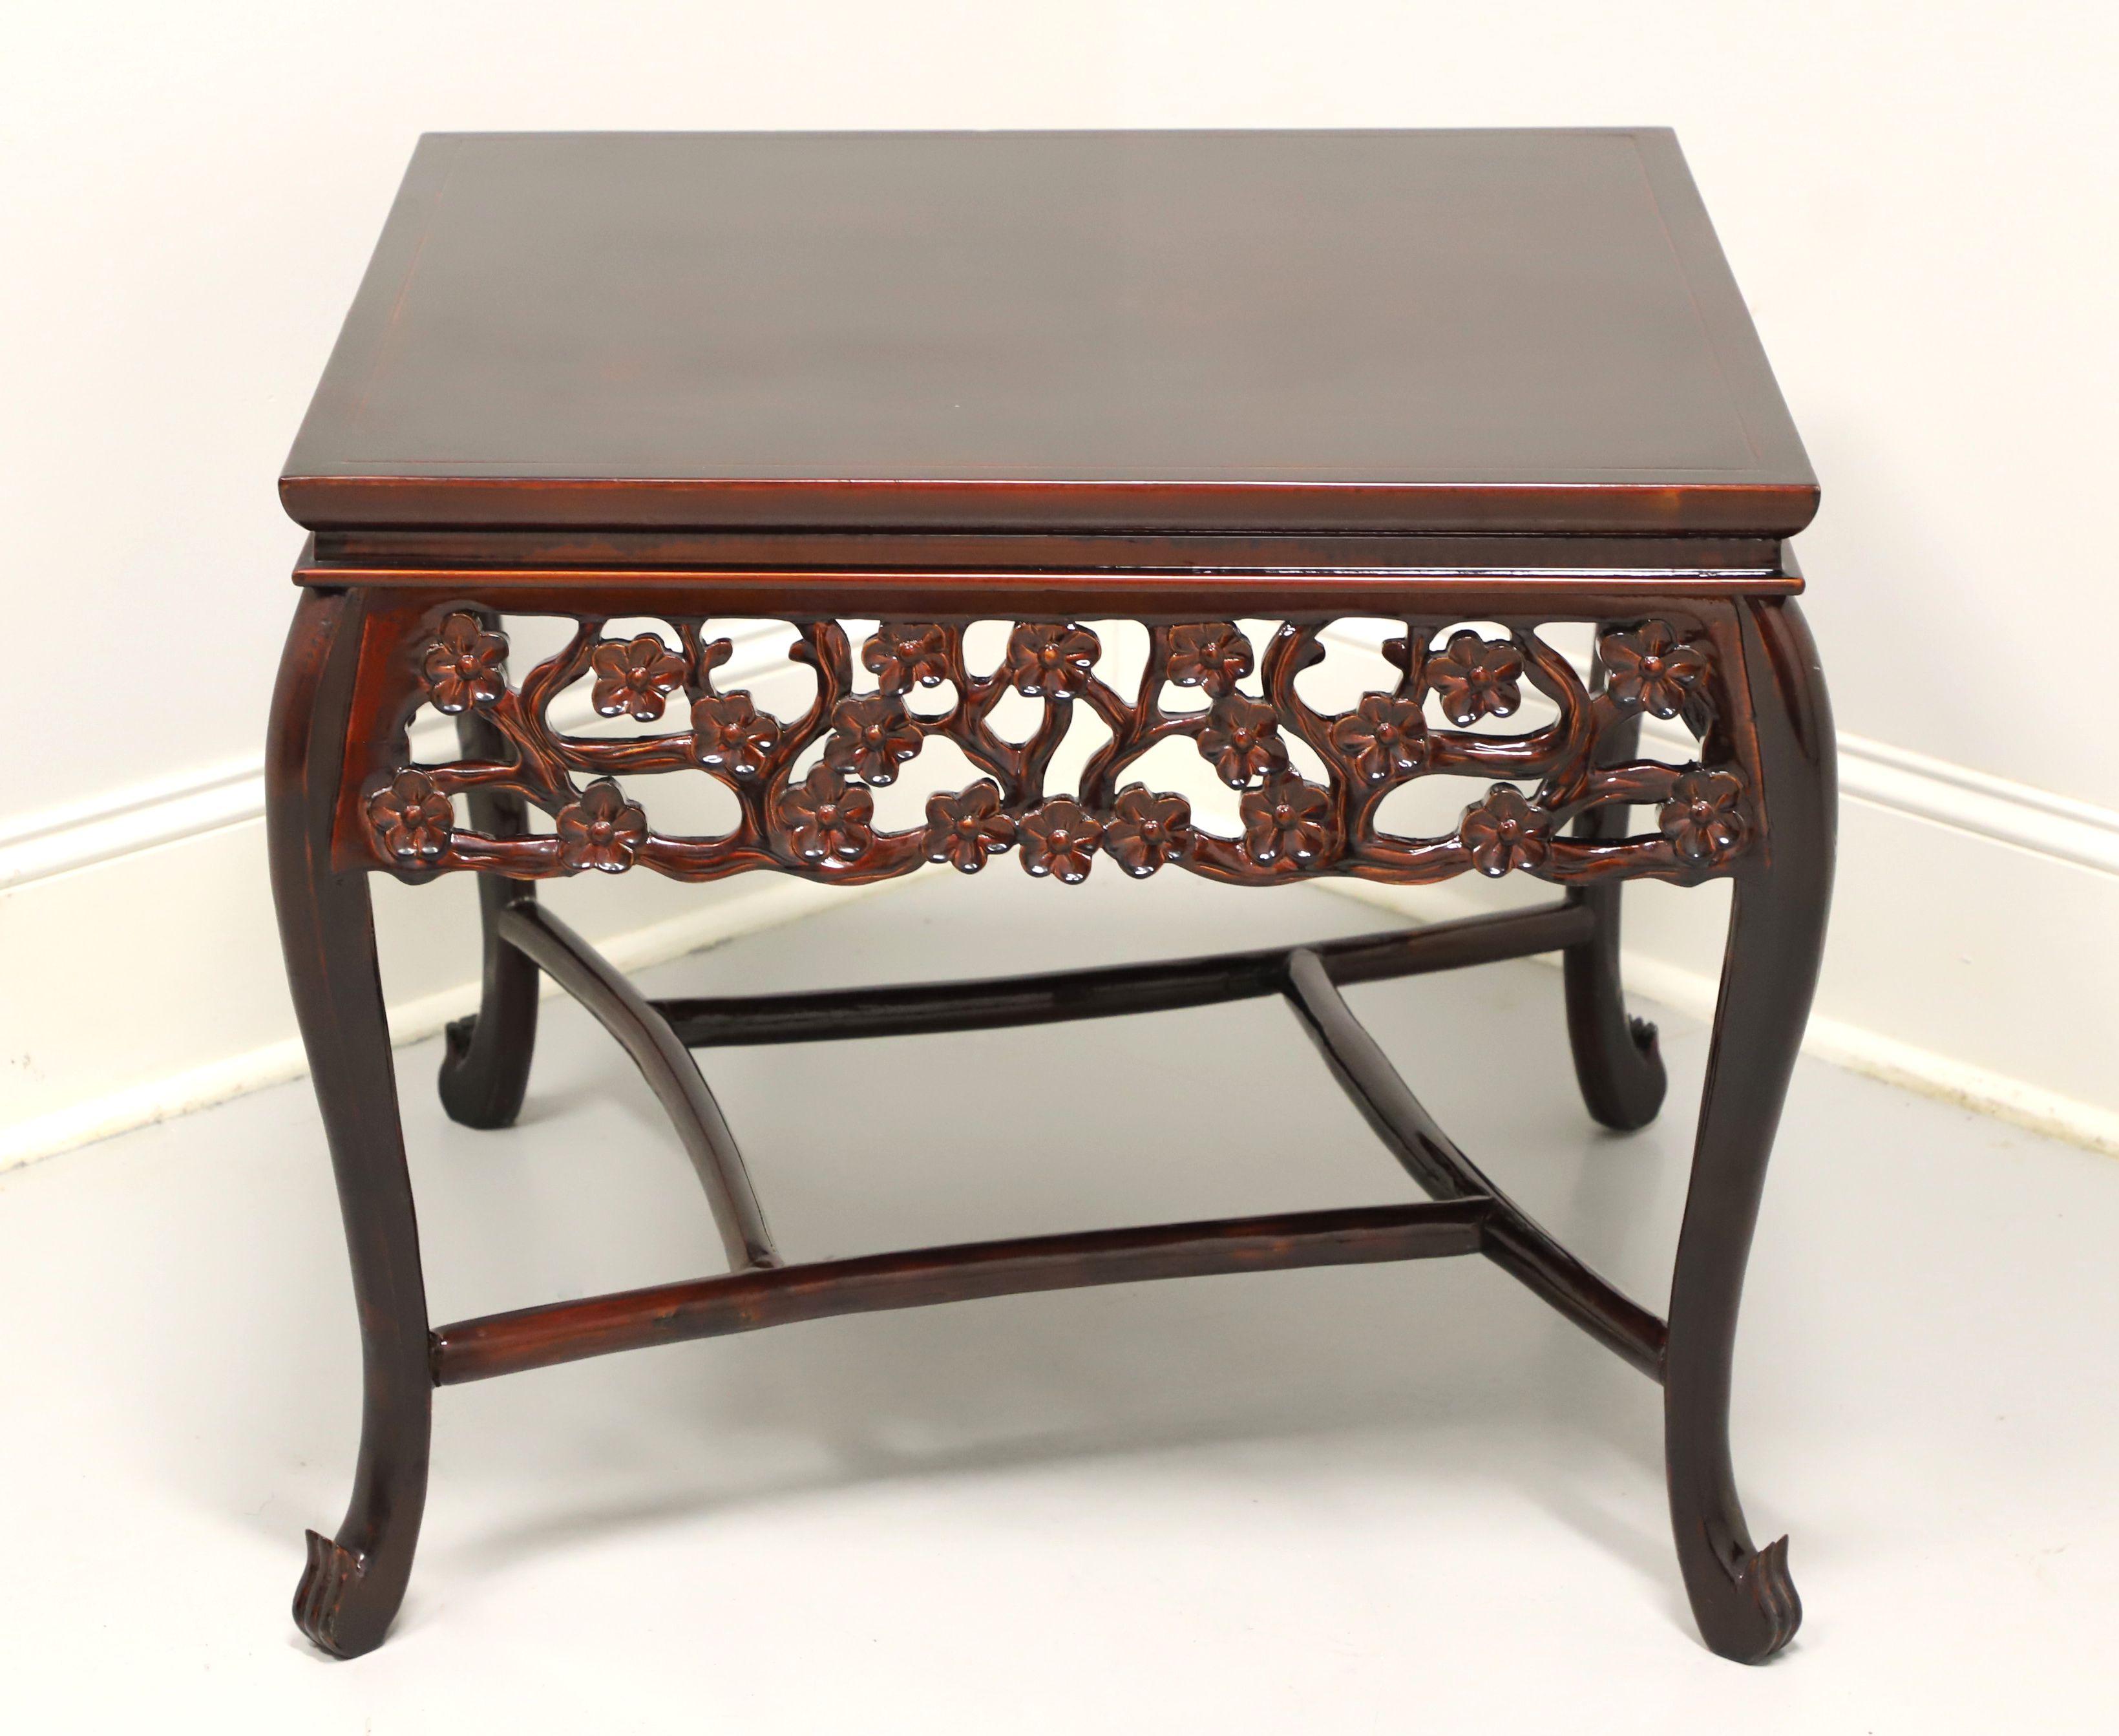 An Asian Chinoiserie style square accent table, unbranded. Solid rosewood, banded top, open carved foliate design to apron, curved legs, connected squared design stretchers and turned up fluted feet. Features the banded top and decoratively carved